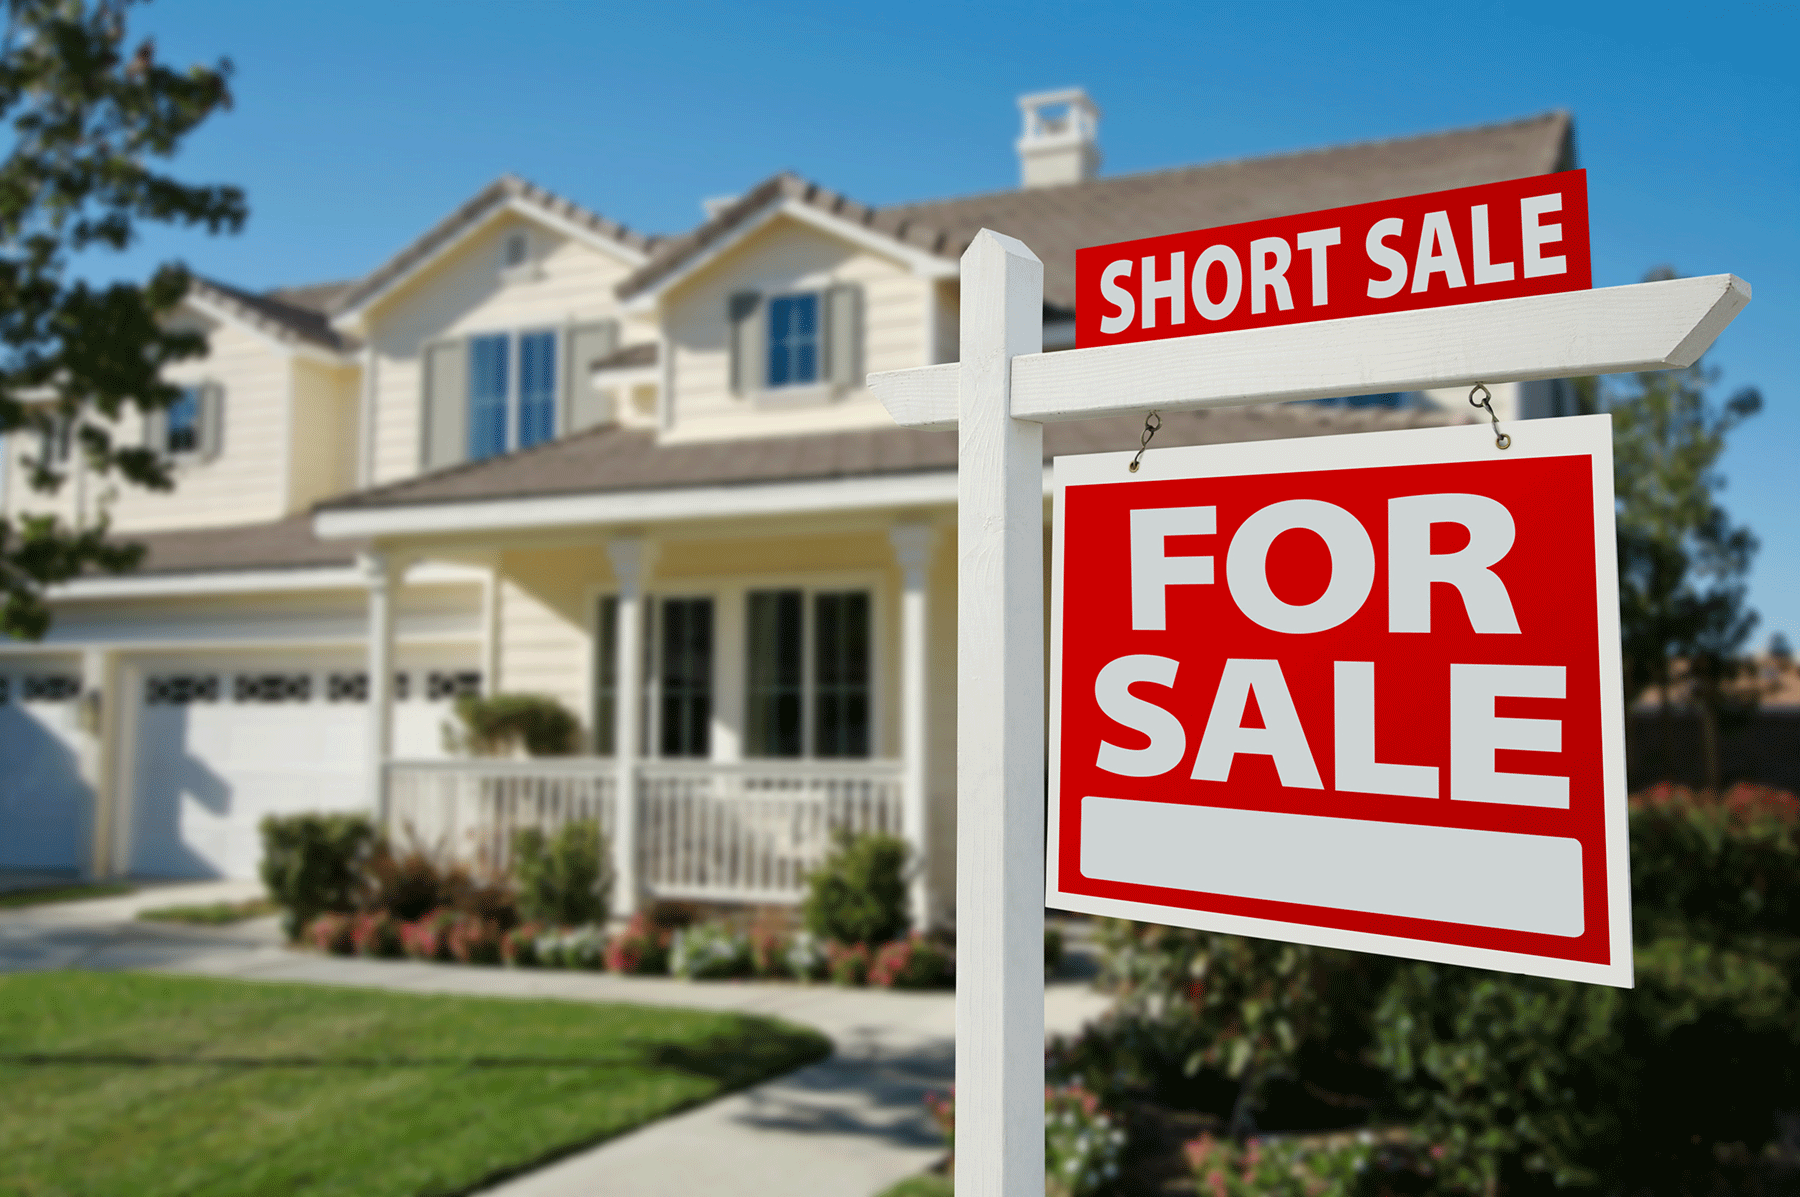 What is a Short Sale and what are the benefits?